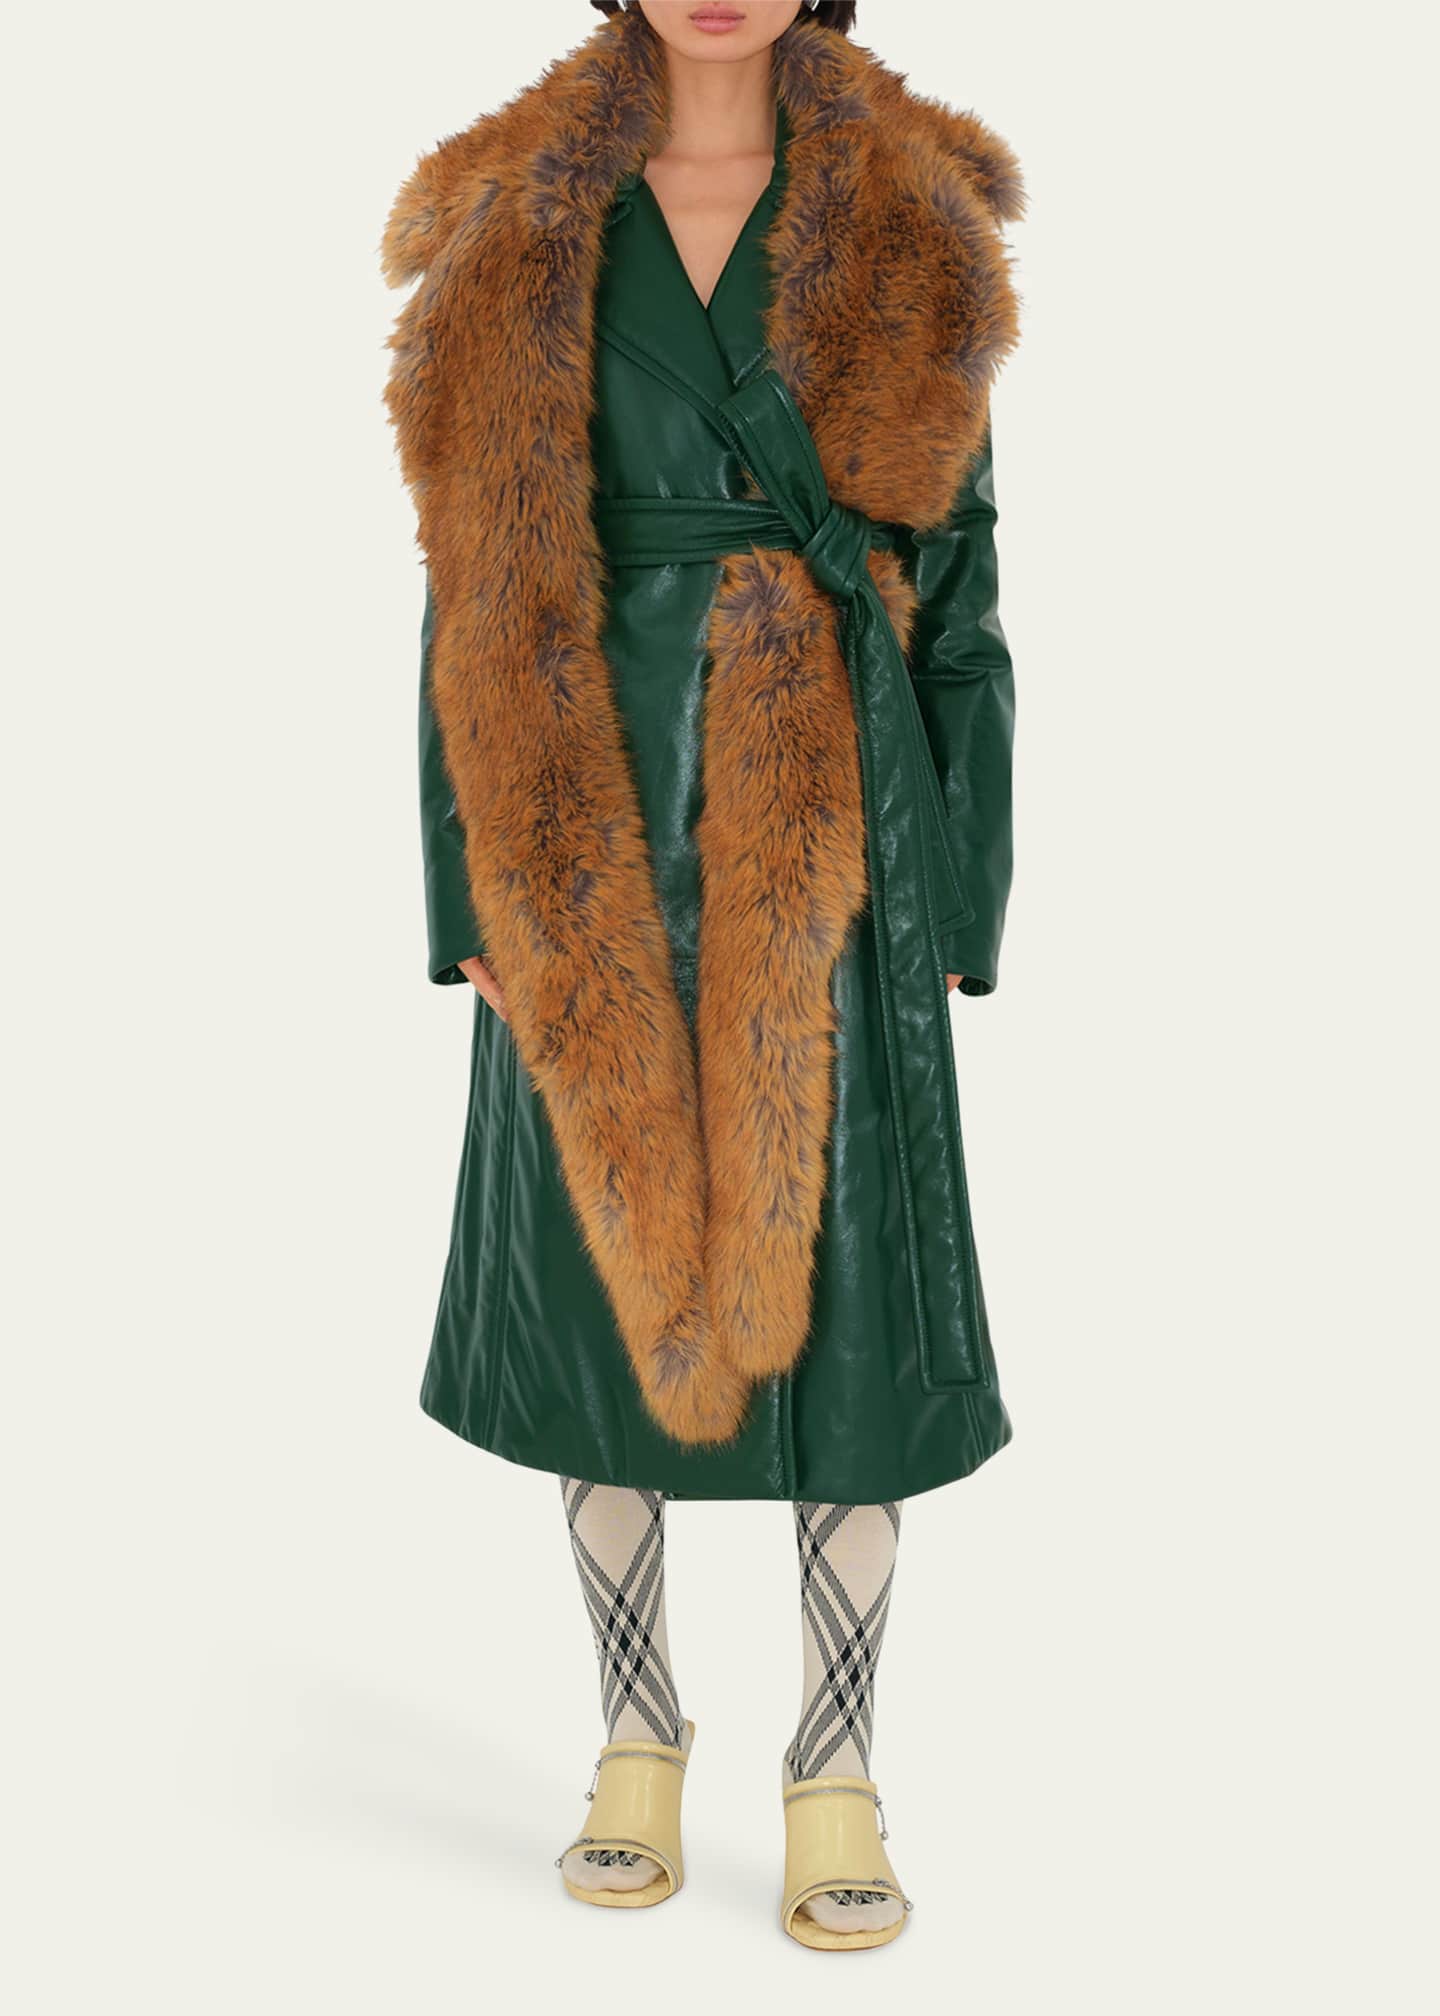 Burberry Belted Leather Trench Coat with Faux Fur Scarf - Bergdorf Goodman